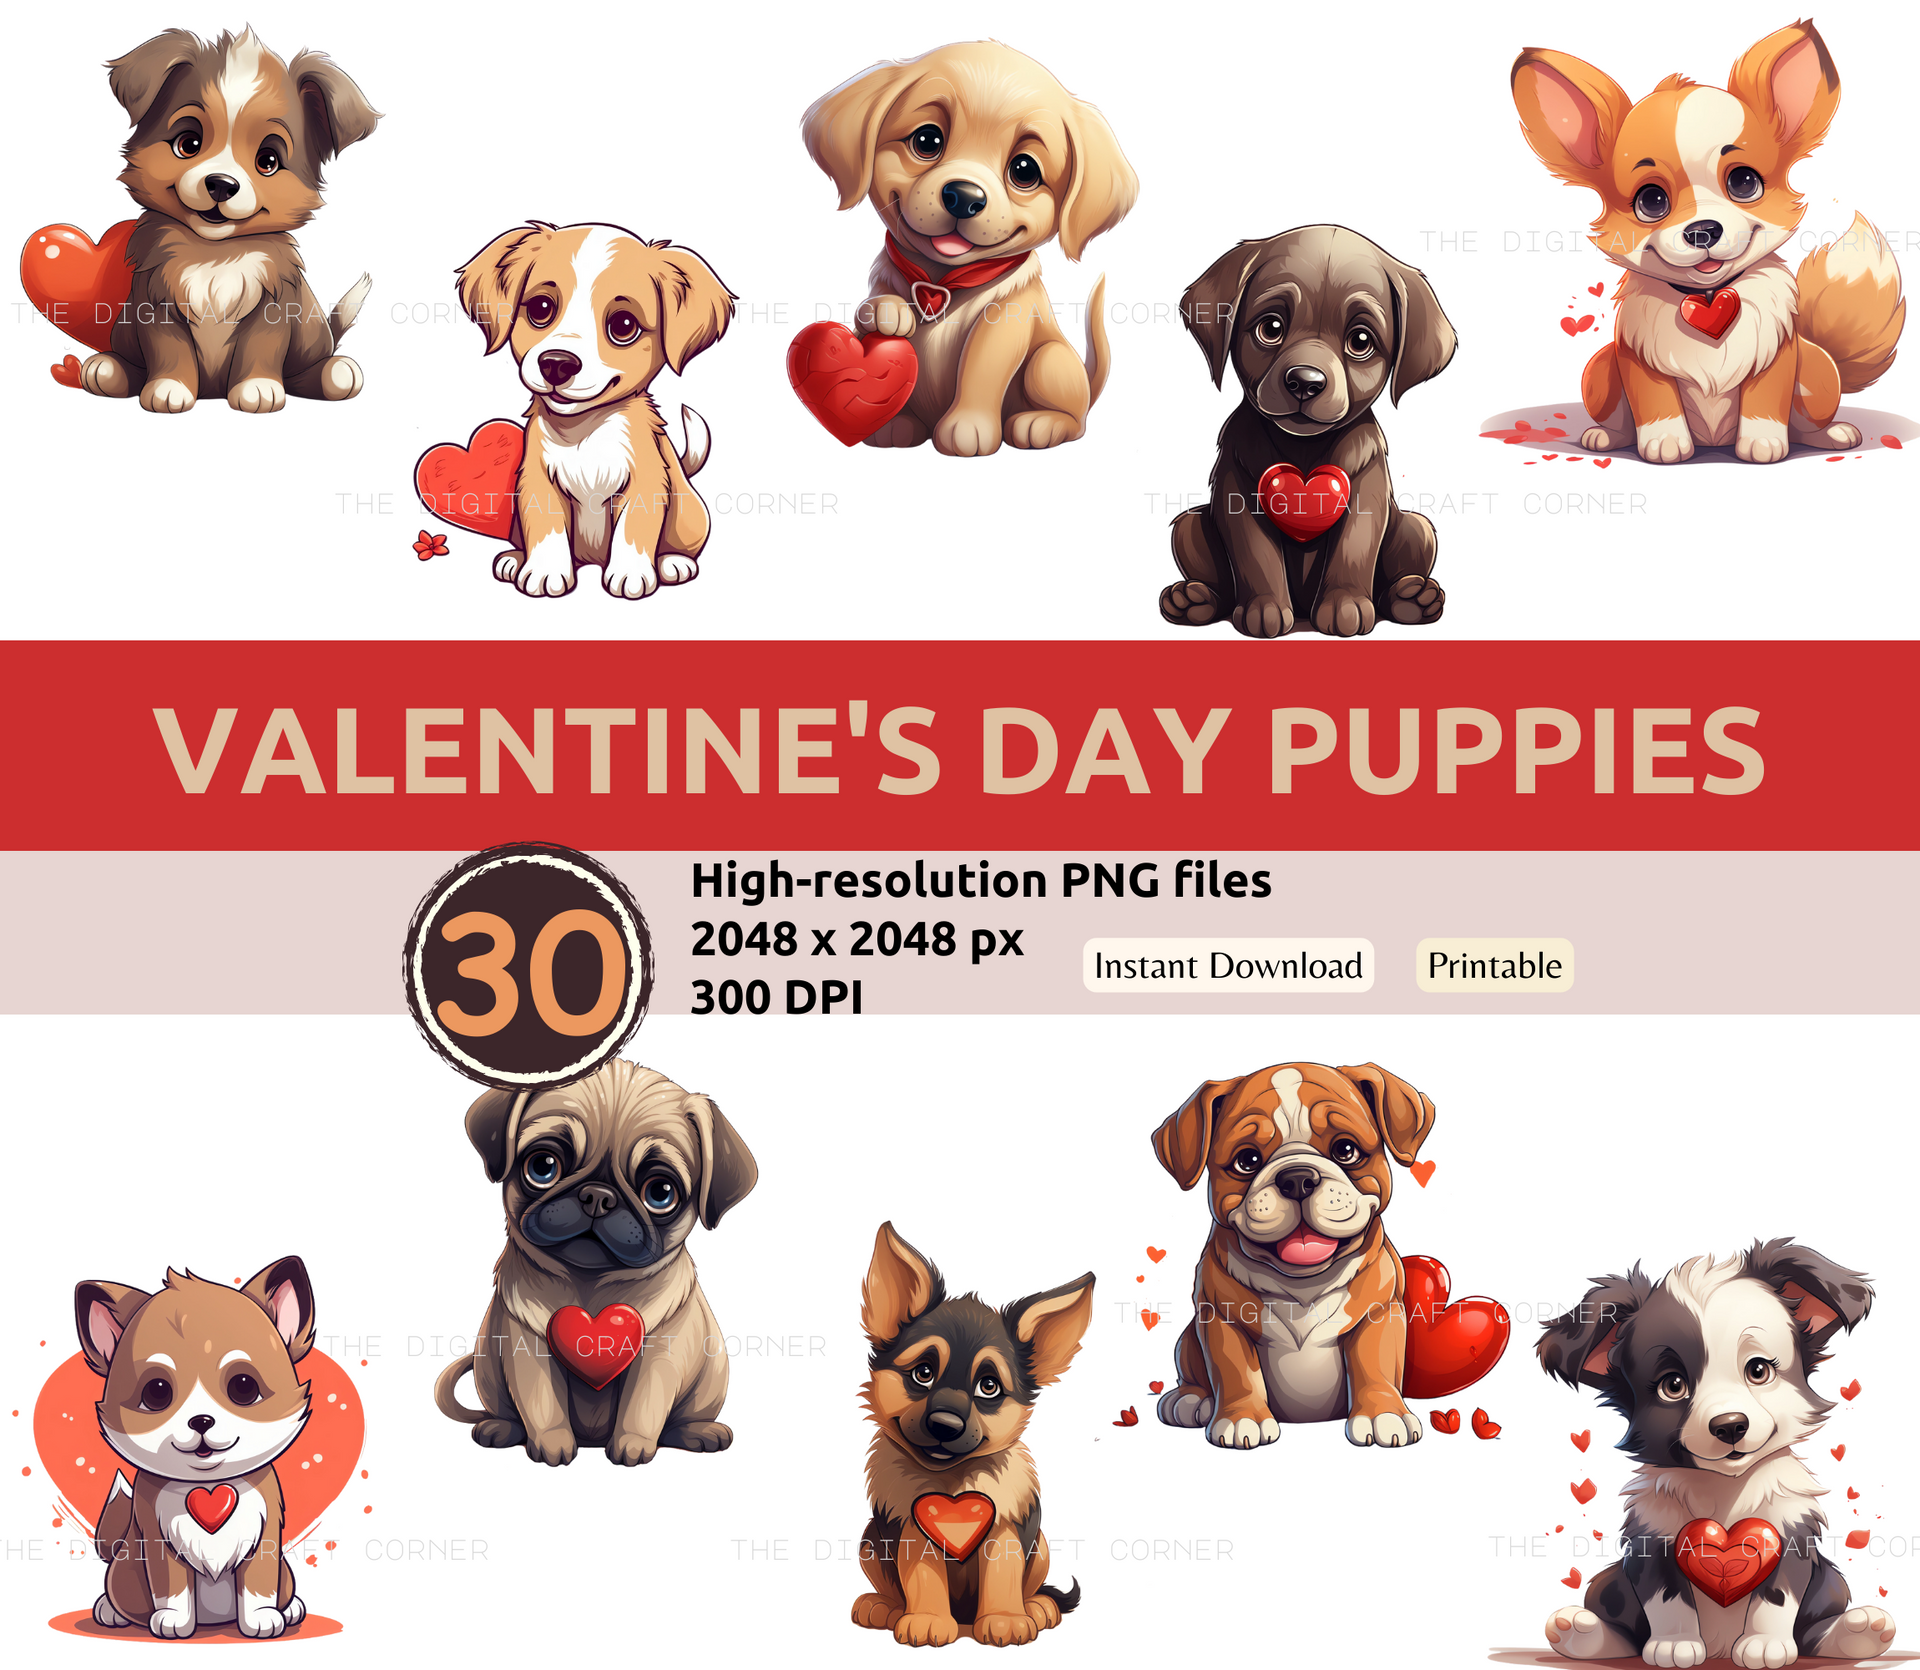 Valentines Day Cards, Puppy Dog Cards, Instant Download